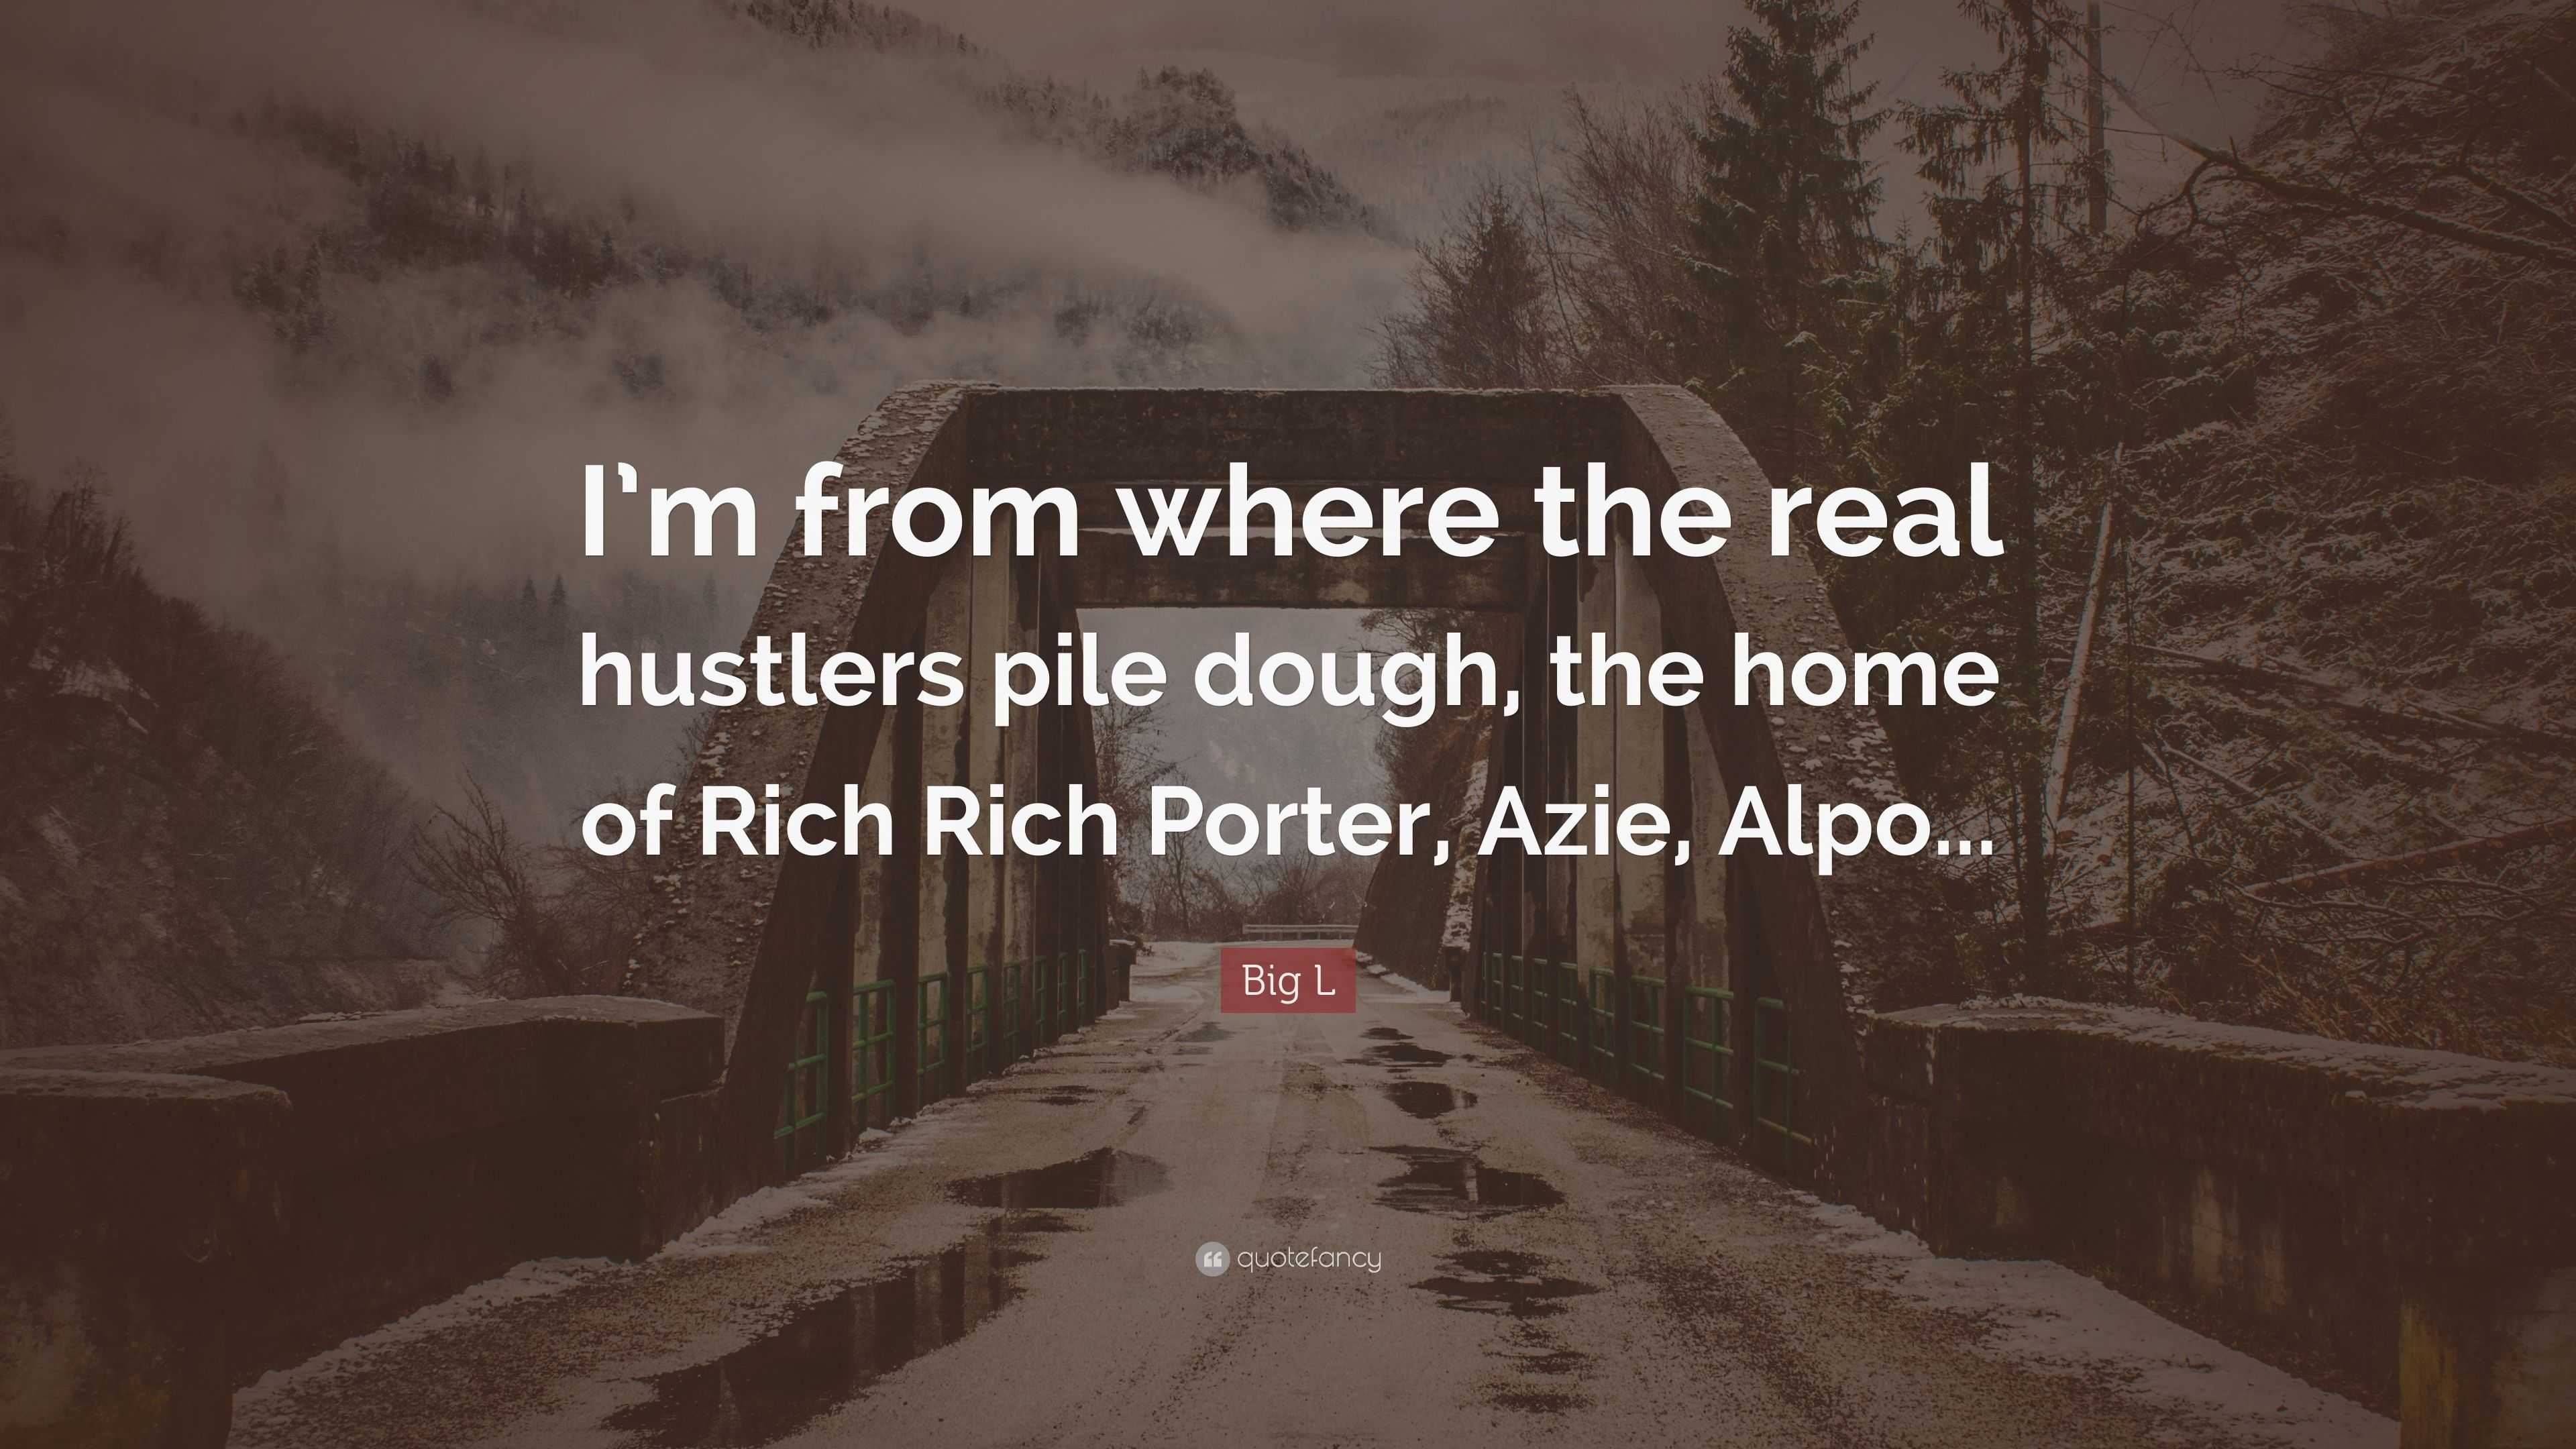 Big L Quote: “I'm from where the real hustlers pile dough, the